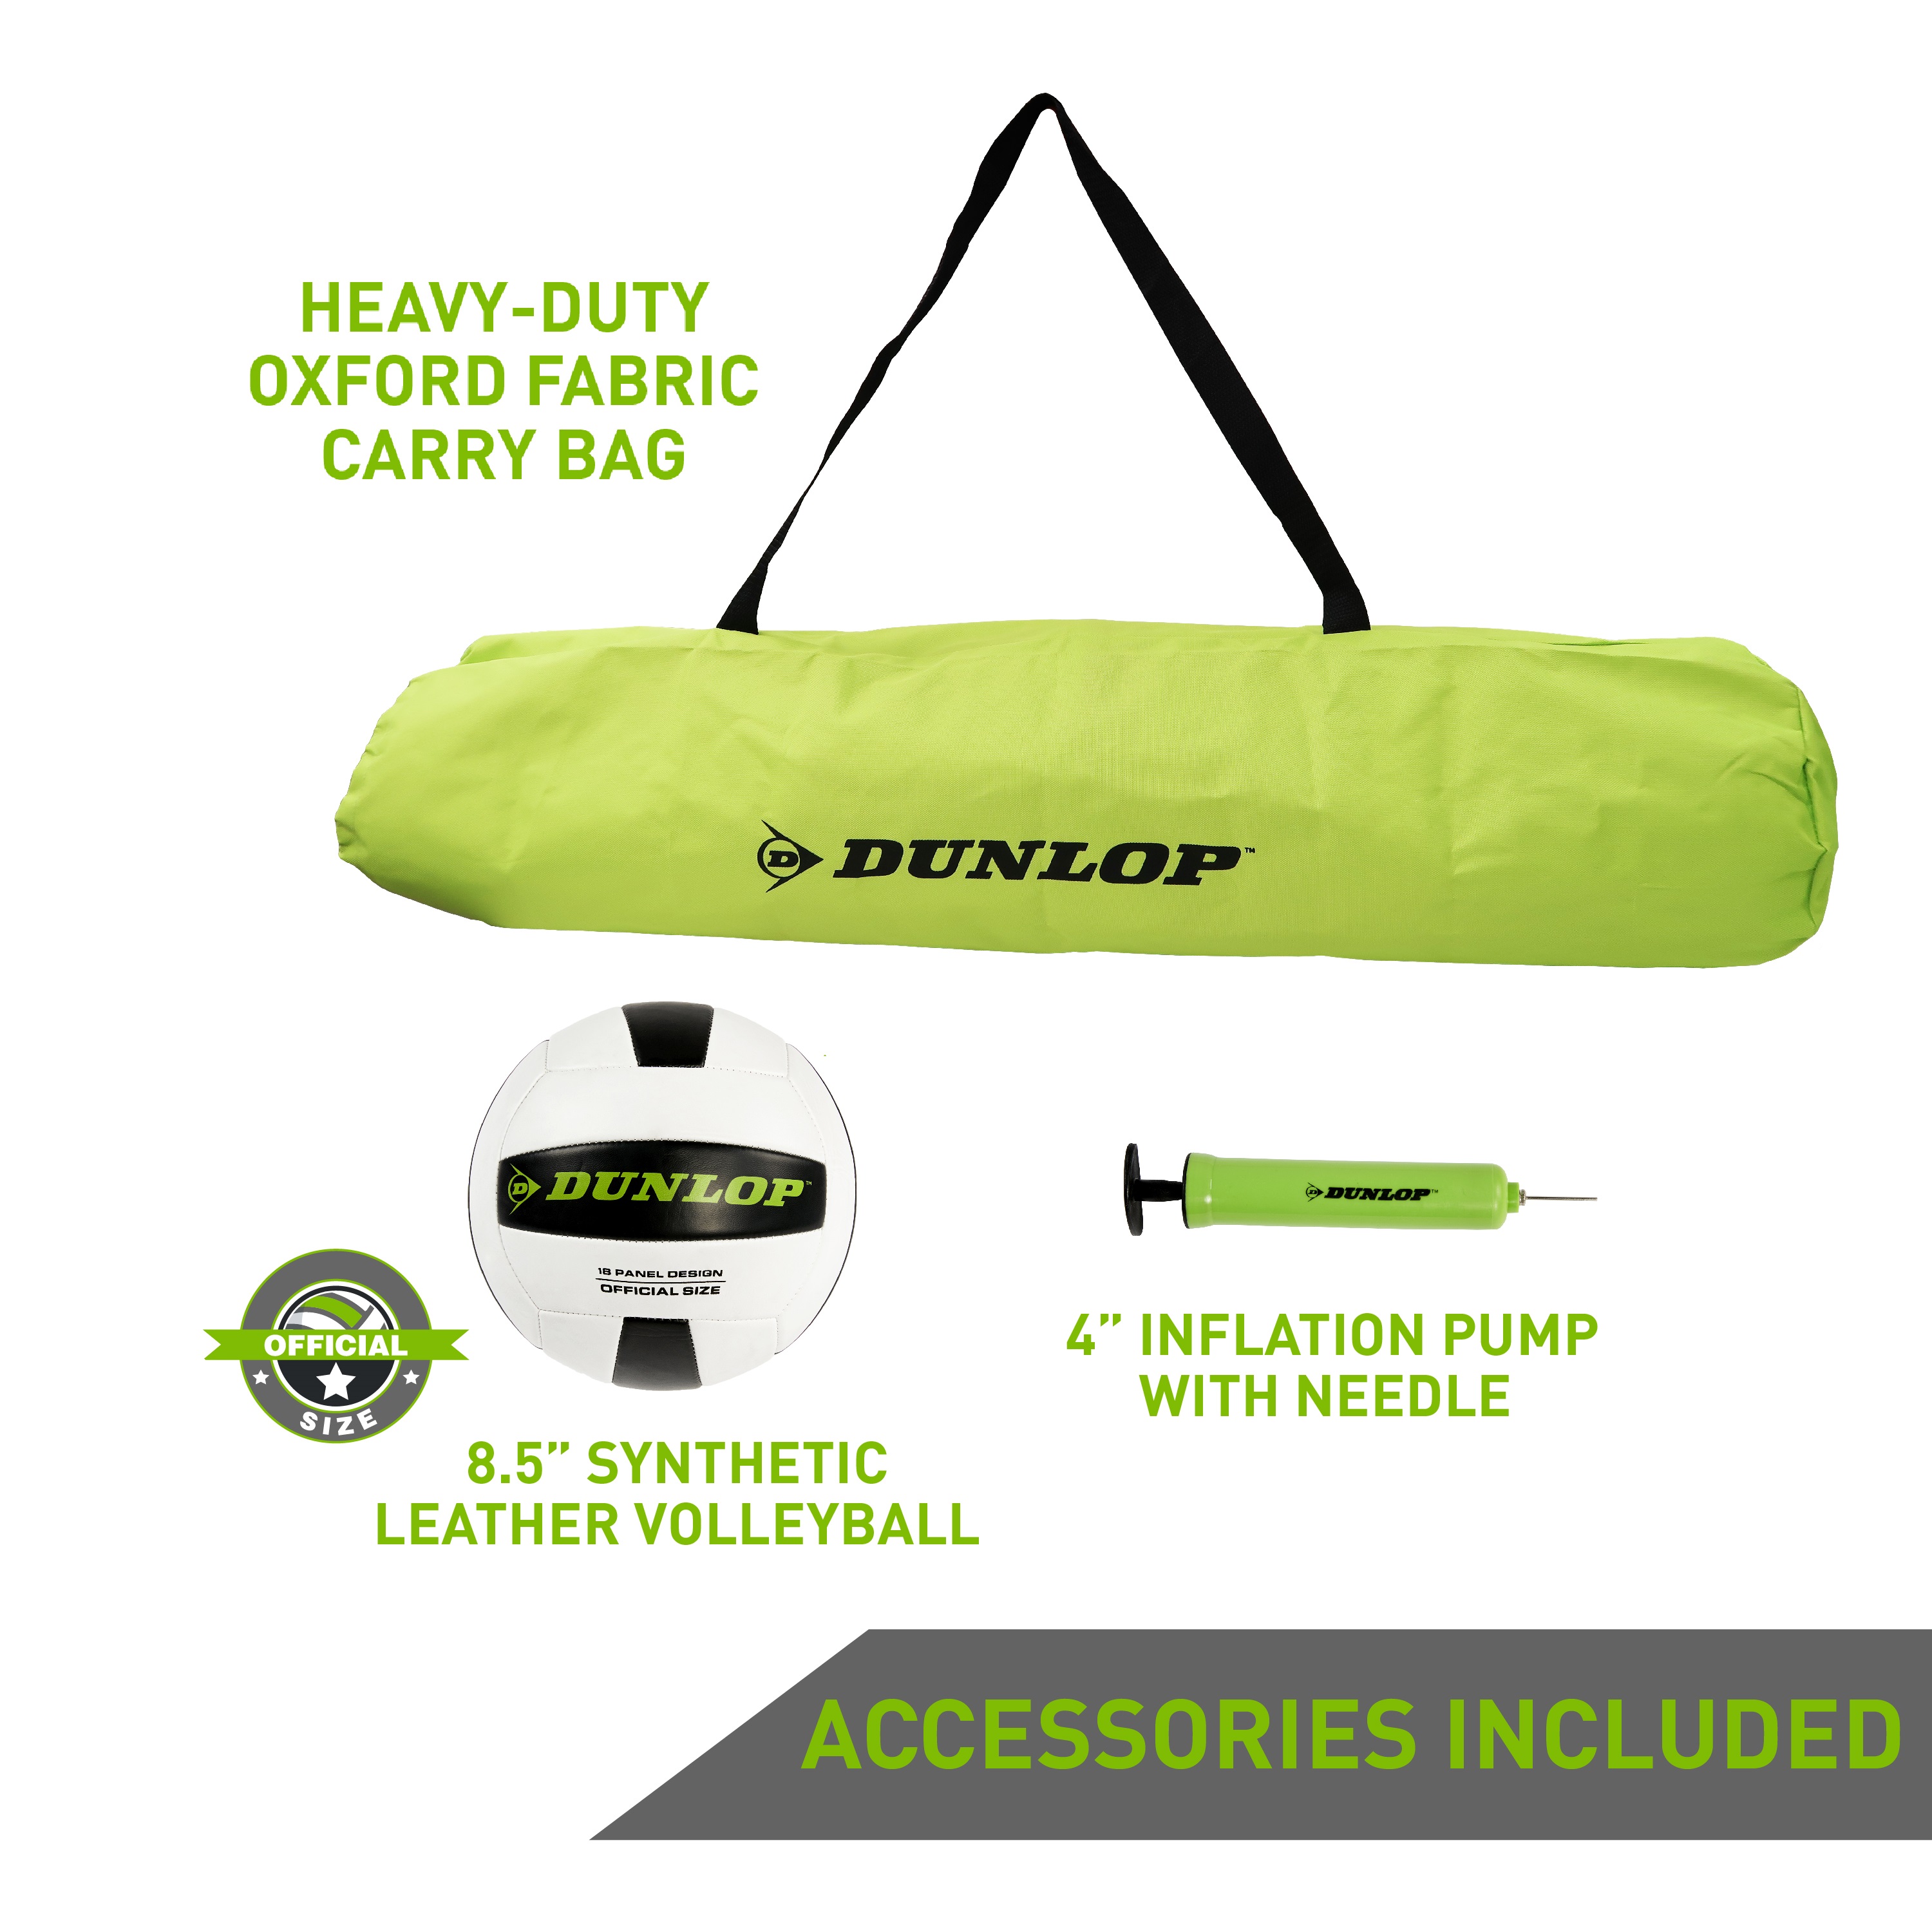 Dunlop Quick Setup Competitive Outdoor Volleyball Set, Green/Black - image 5 of 9